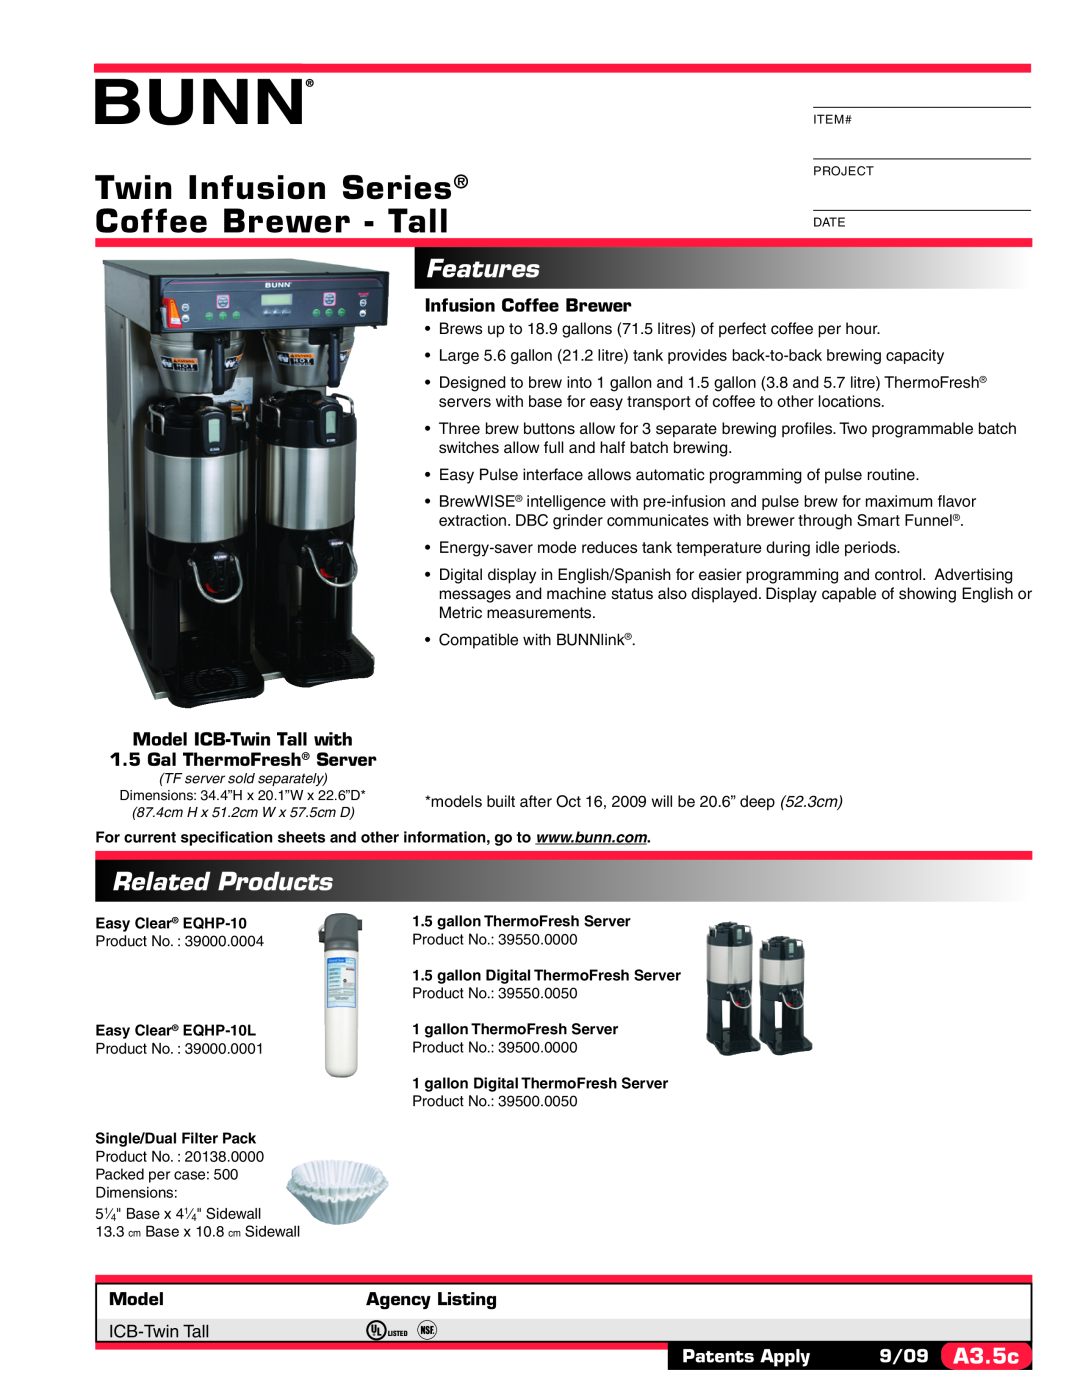 Bunn ICB-TWIN TALL specifications Twin Infusion Series Coffee Brewer - Tall, Features, Related Products, Model, 9/09 A3.5c 